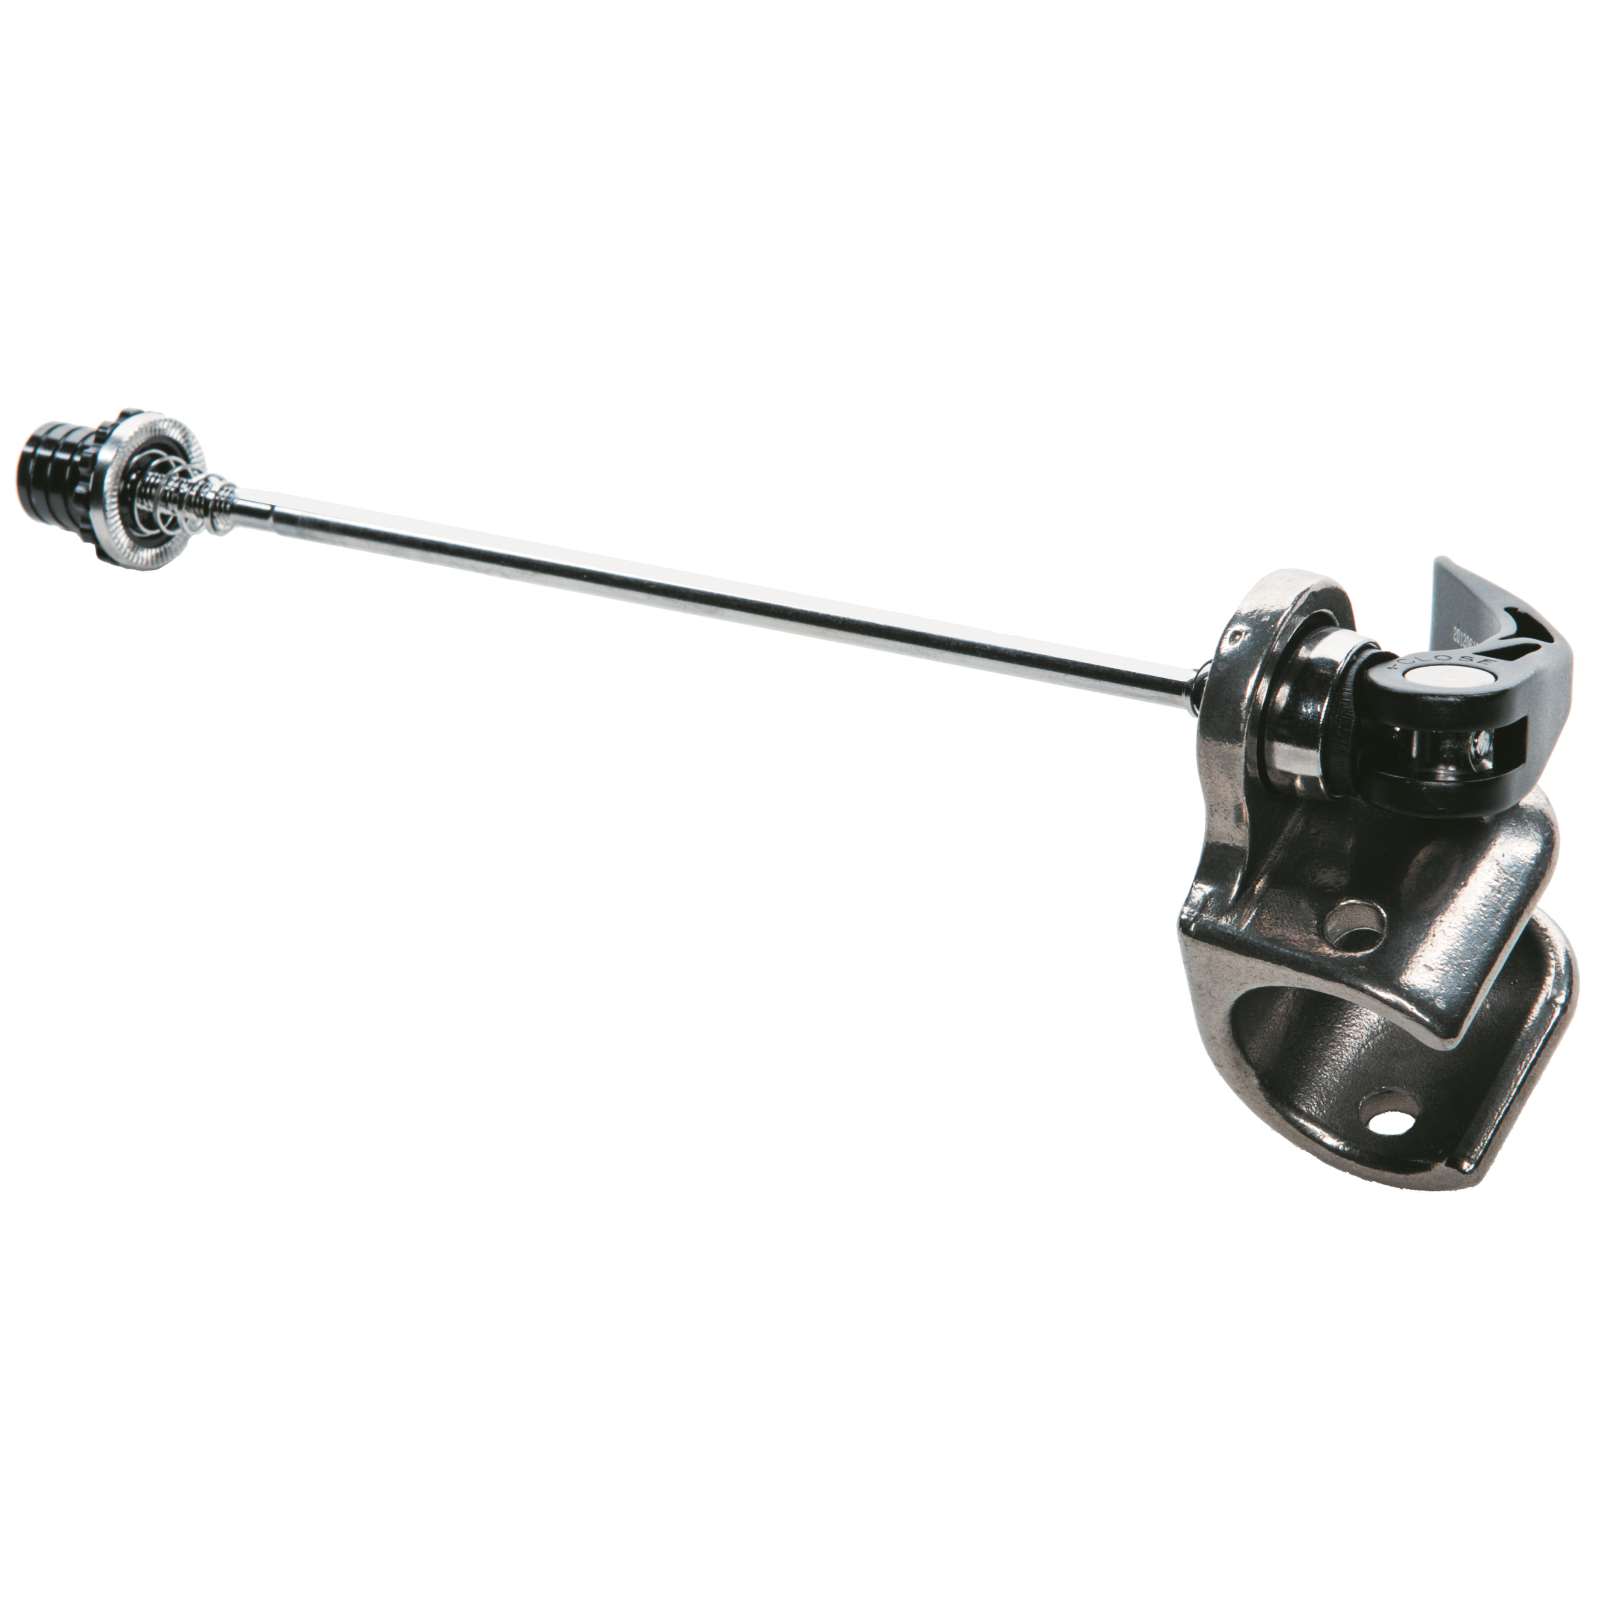 Axle Mount ezHitch Cup with Quick Release Skewer